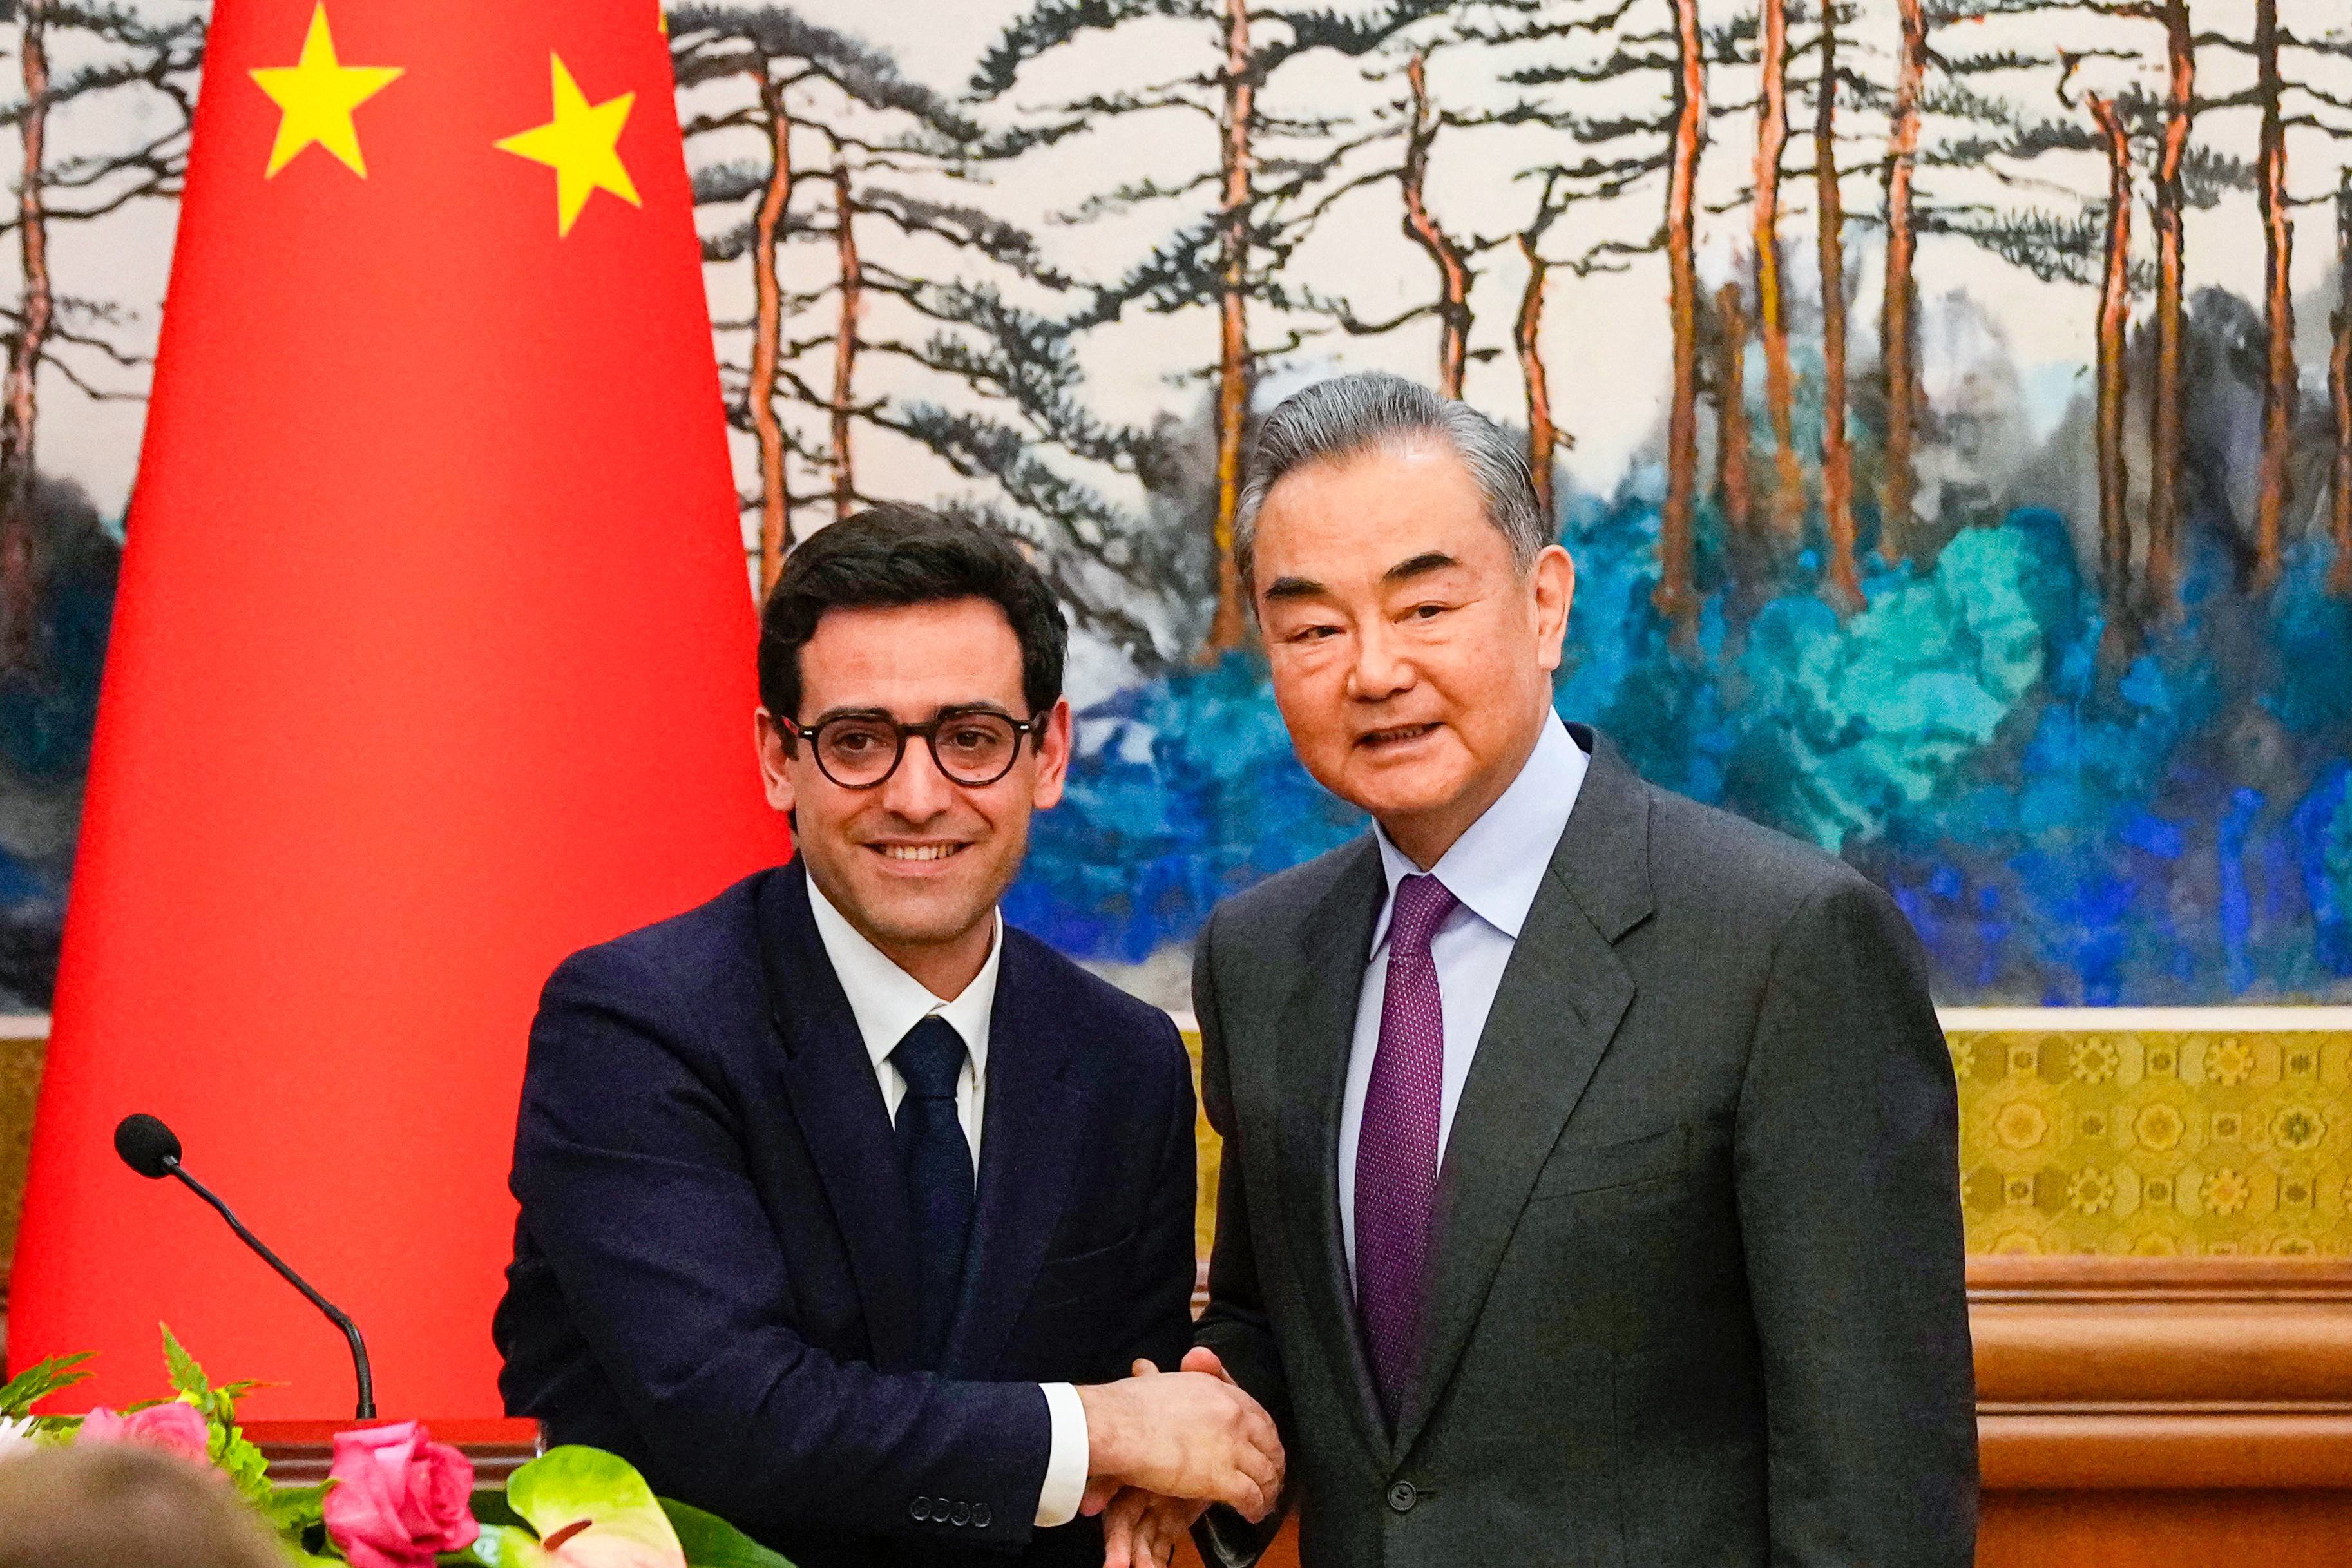 French and Chinese Foreign Ministers Stéphane Séjourné and Wang Yi pictured at their joint press conference in Beijing.  Photo: AFP